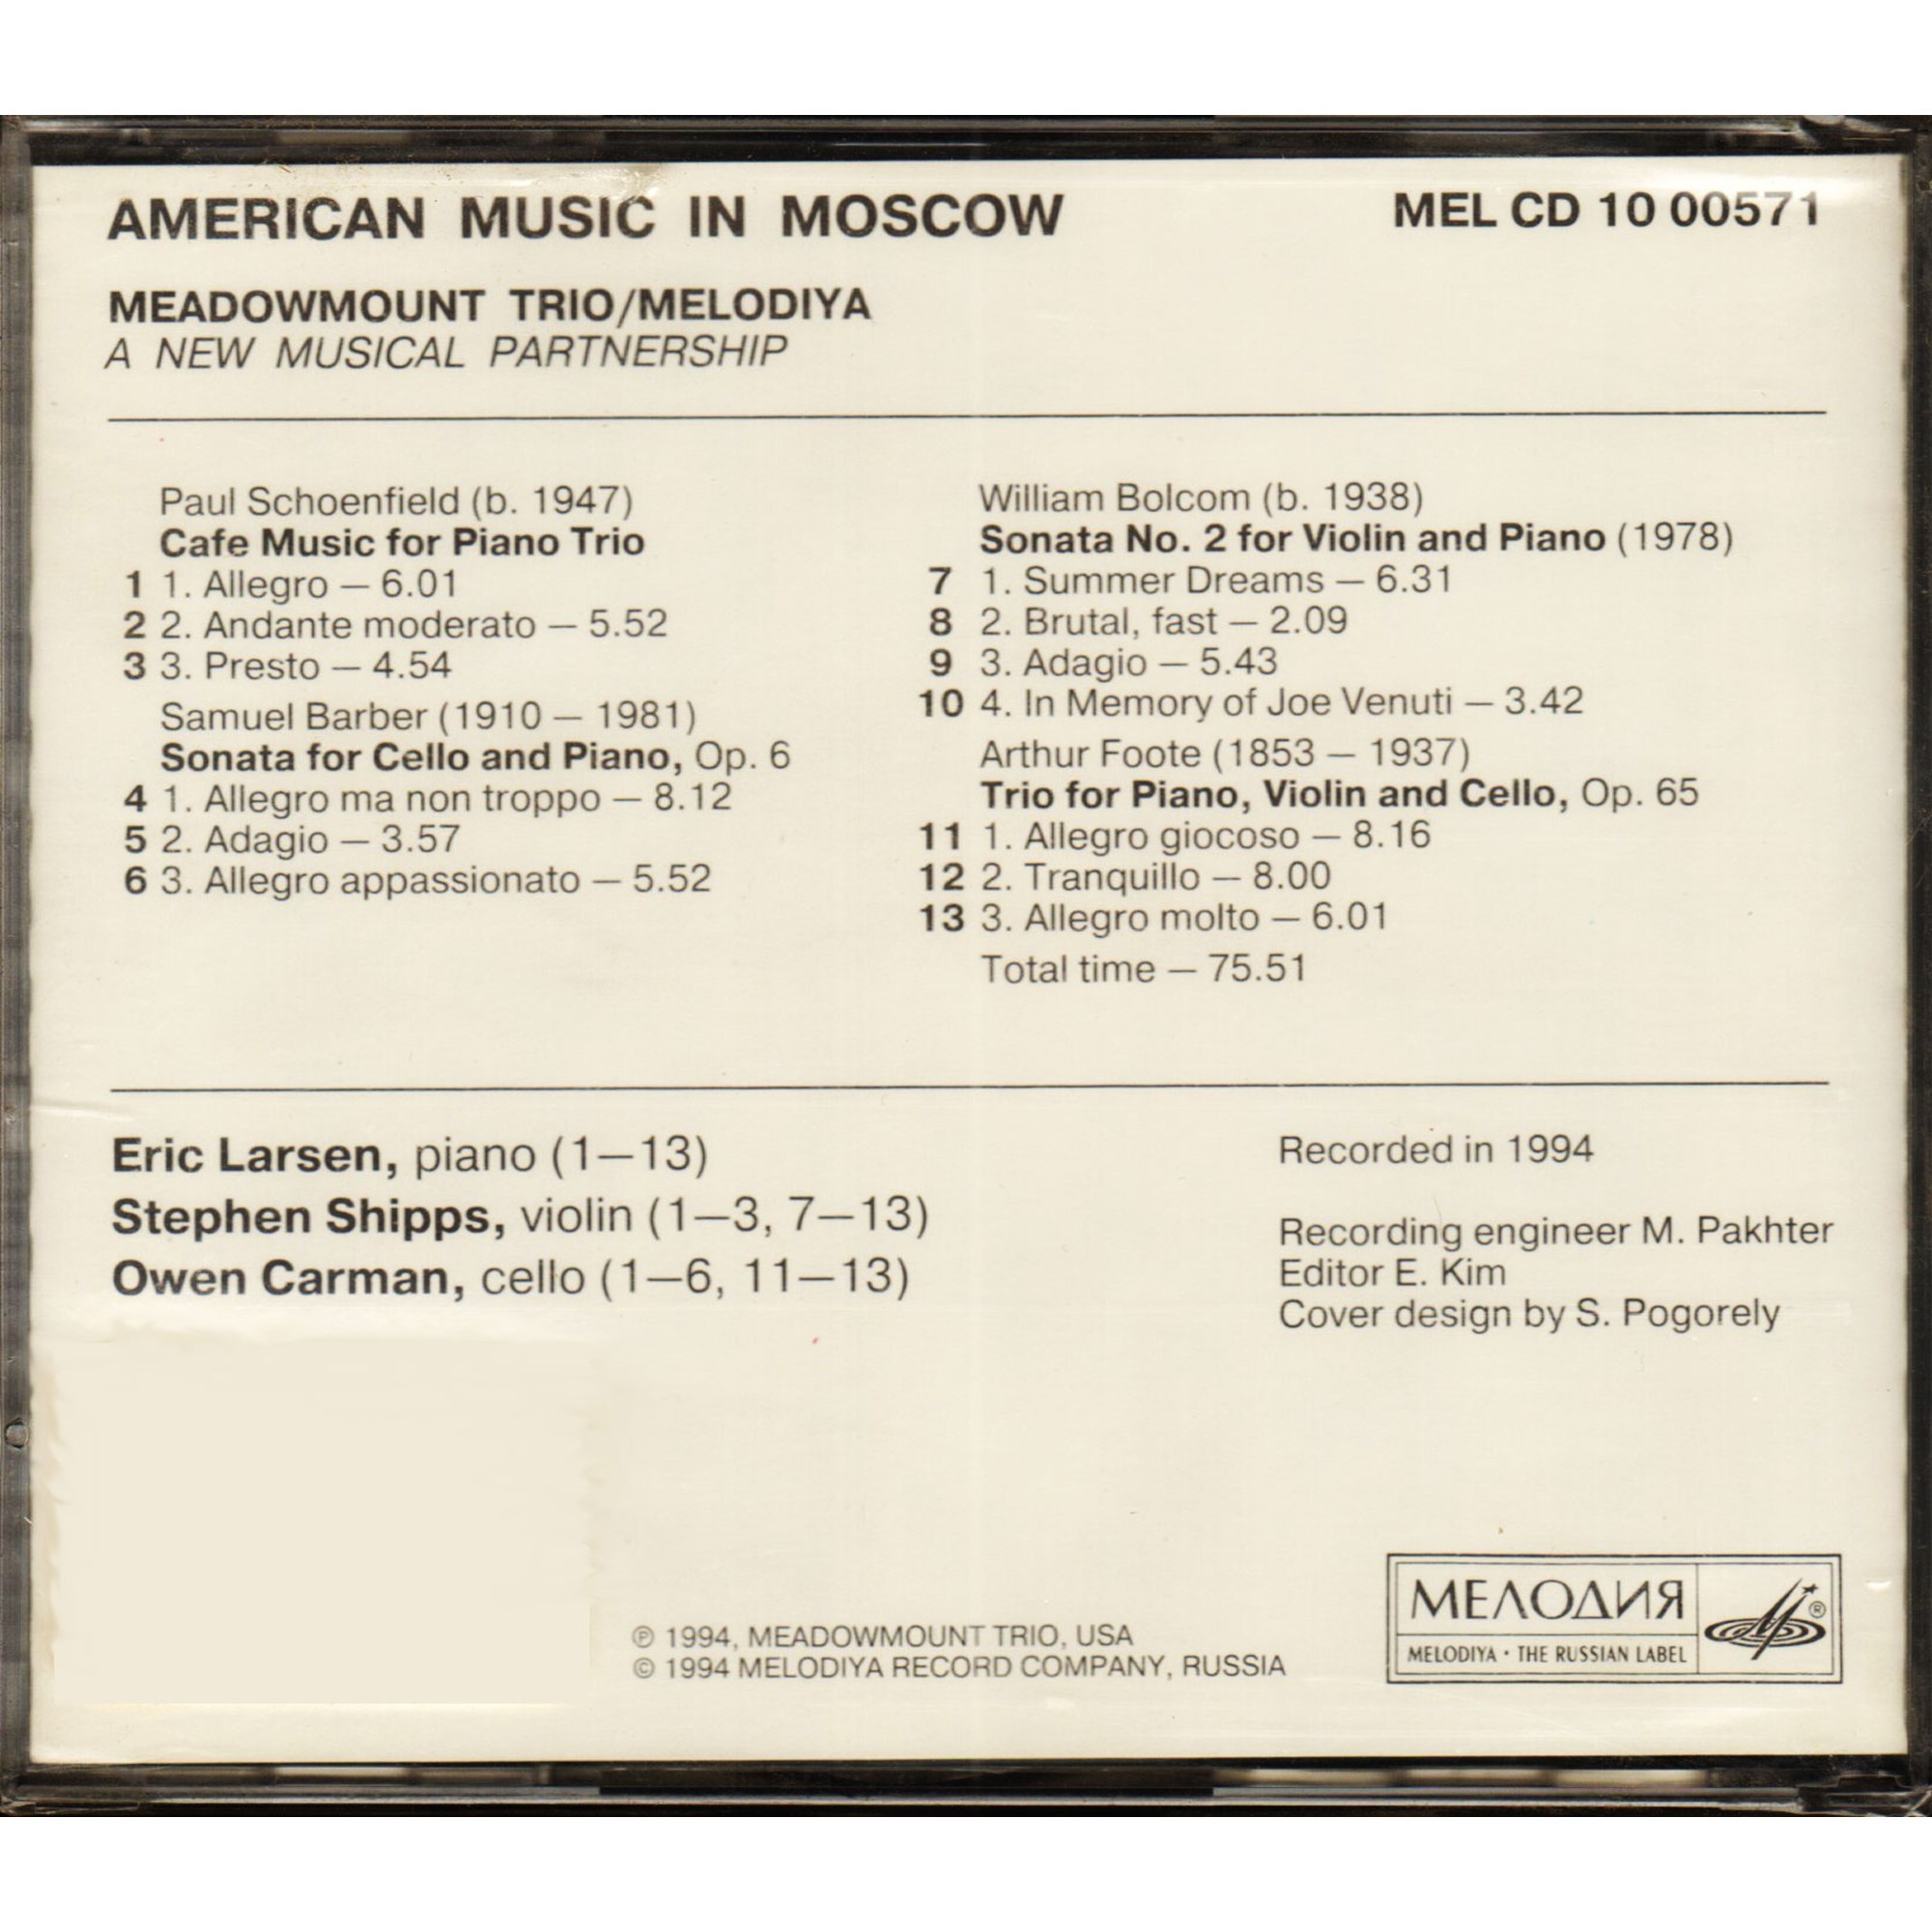 American music in Moscow. Meadowmount Trio